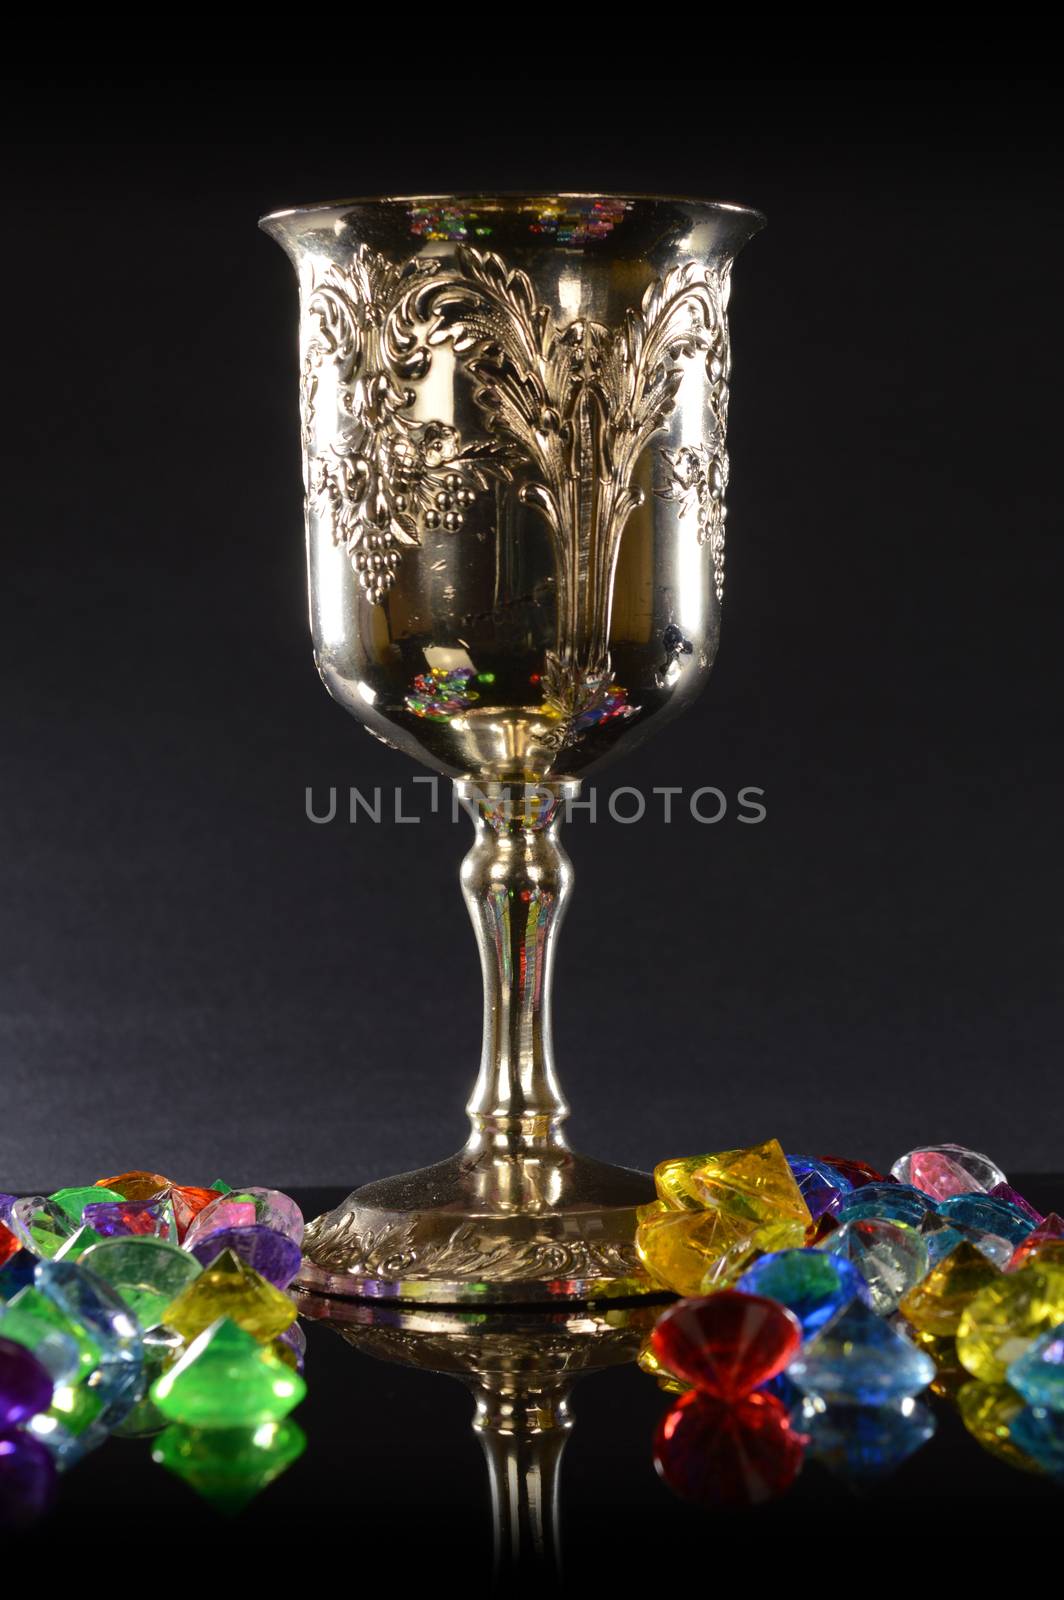 A silver wineglass with several pieces of gemstones over a black background.